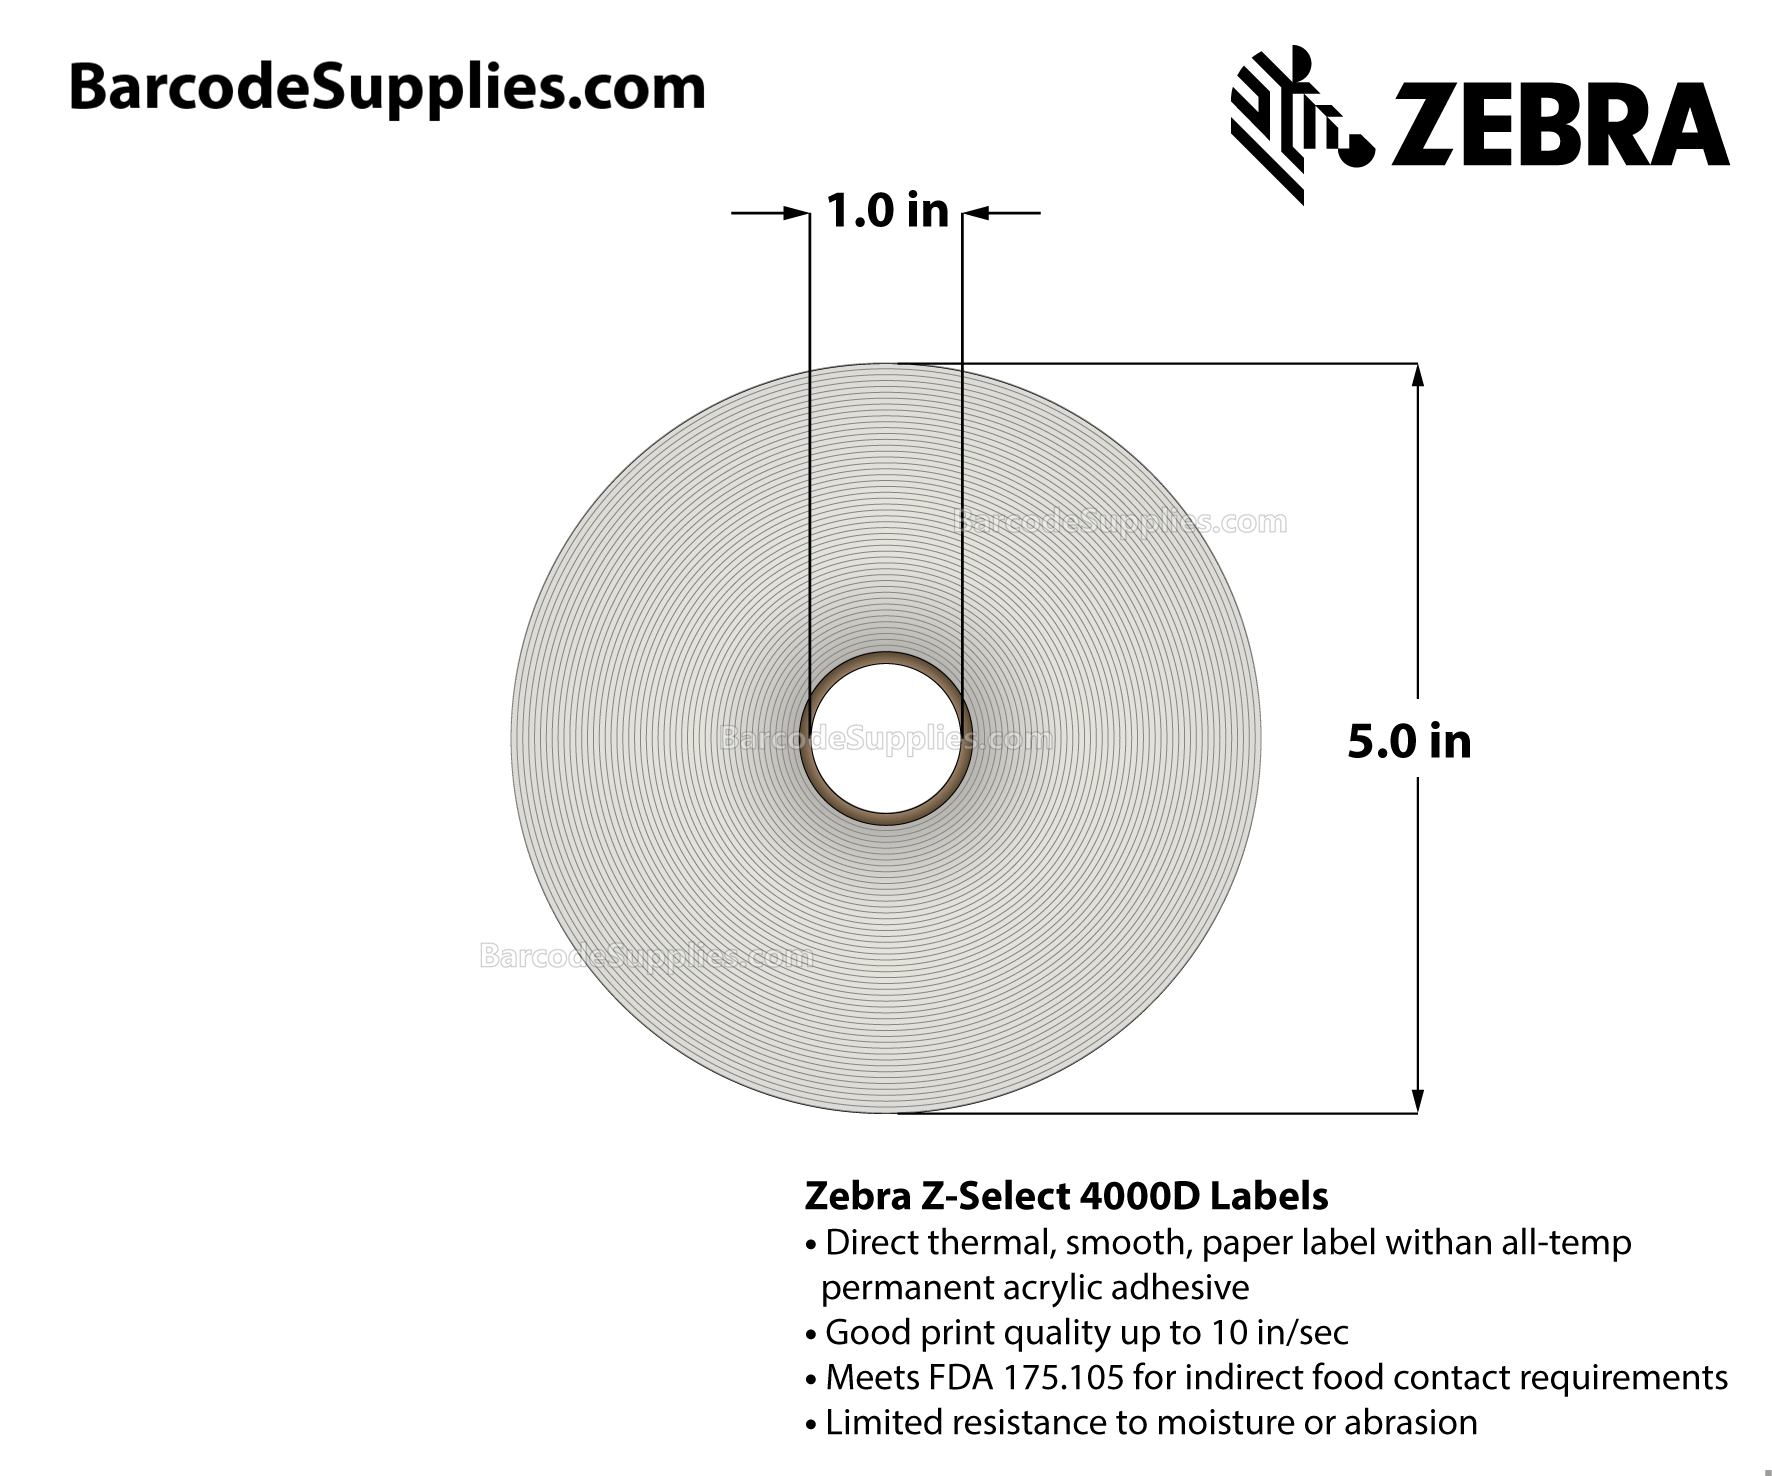 4 x 1.25 Direct Thermal White Z-Select 4000D Labels With All-Temp Adhesive - Perforated - 2100 Labels Per Roll - Carton Of 12 Rolls - 25200 Labels Total - MPN: 10015349